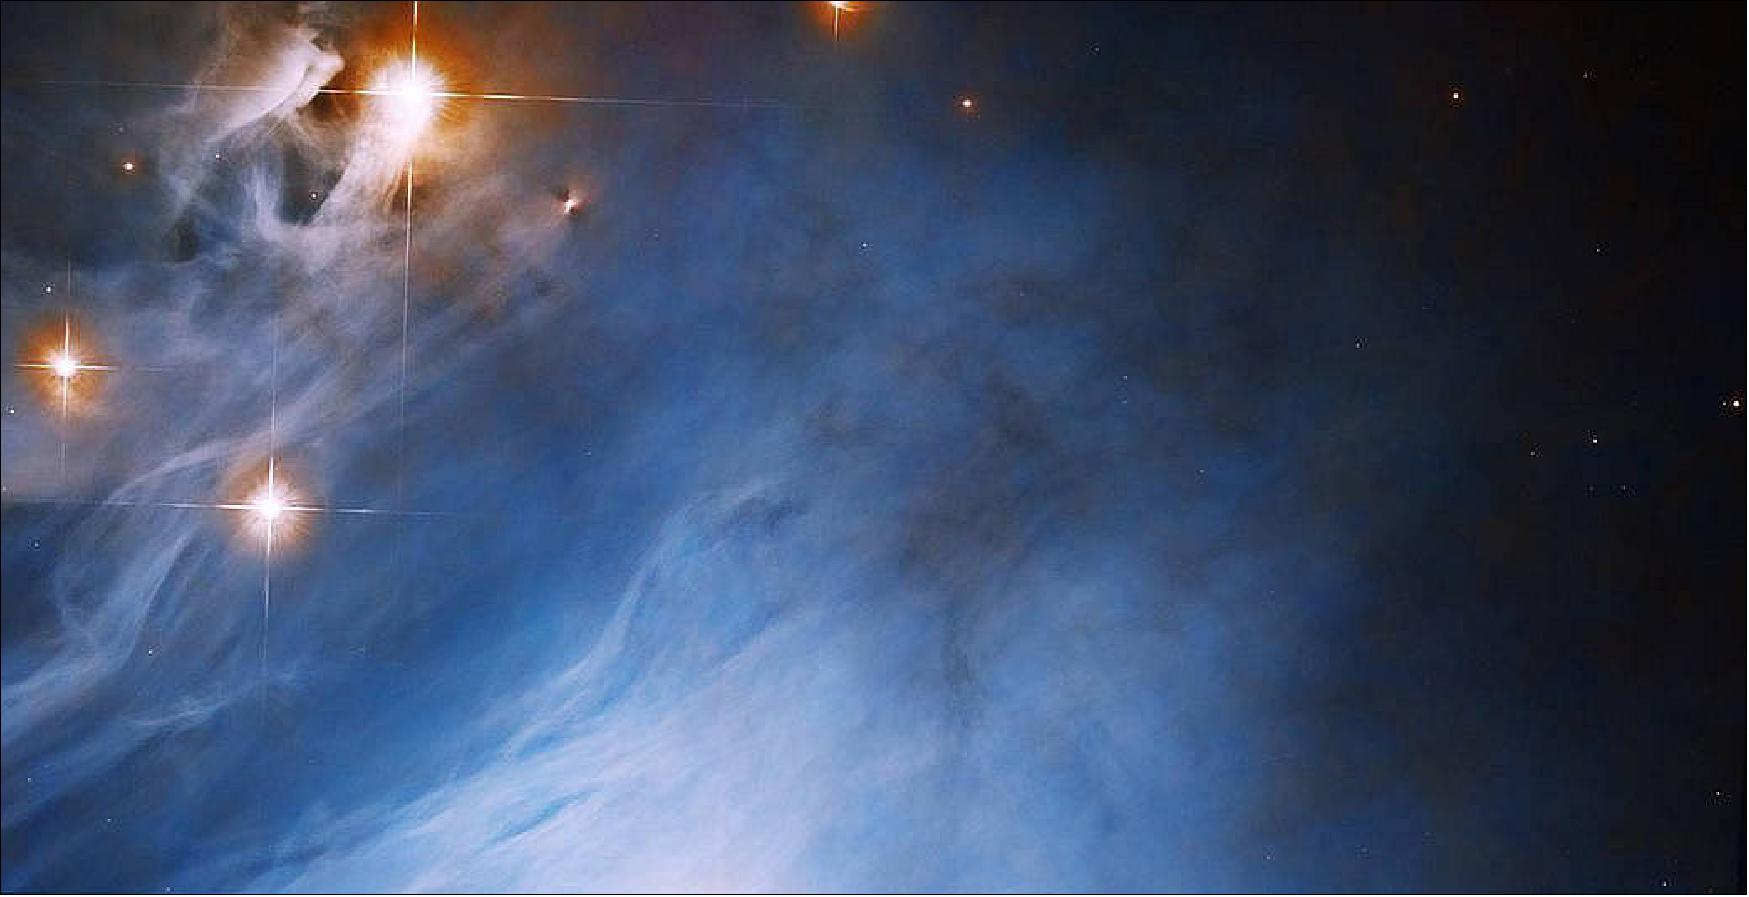 Figure 23: Hubble observed this nebula while looking for disks of gas and dust around young stars. Such disks are left over from the formation of the star and may eventually form planets [image credit: NASA, ESA, and K. Stapelfeldt (Jet Propulsion Laboratory); Processing; Gladys Kober (NASA/Catholic University of America)]